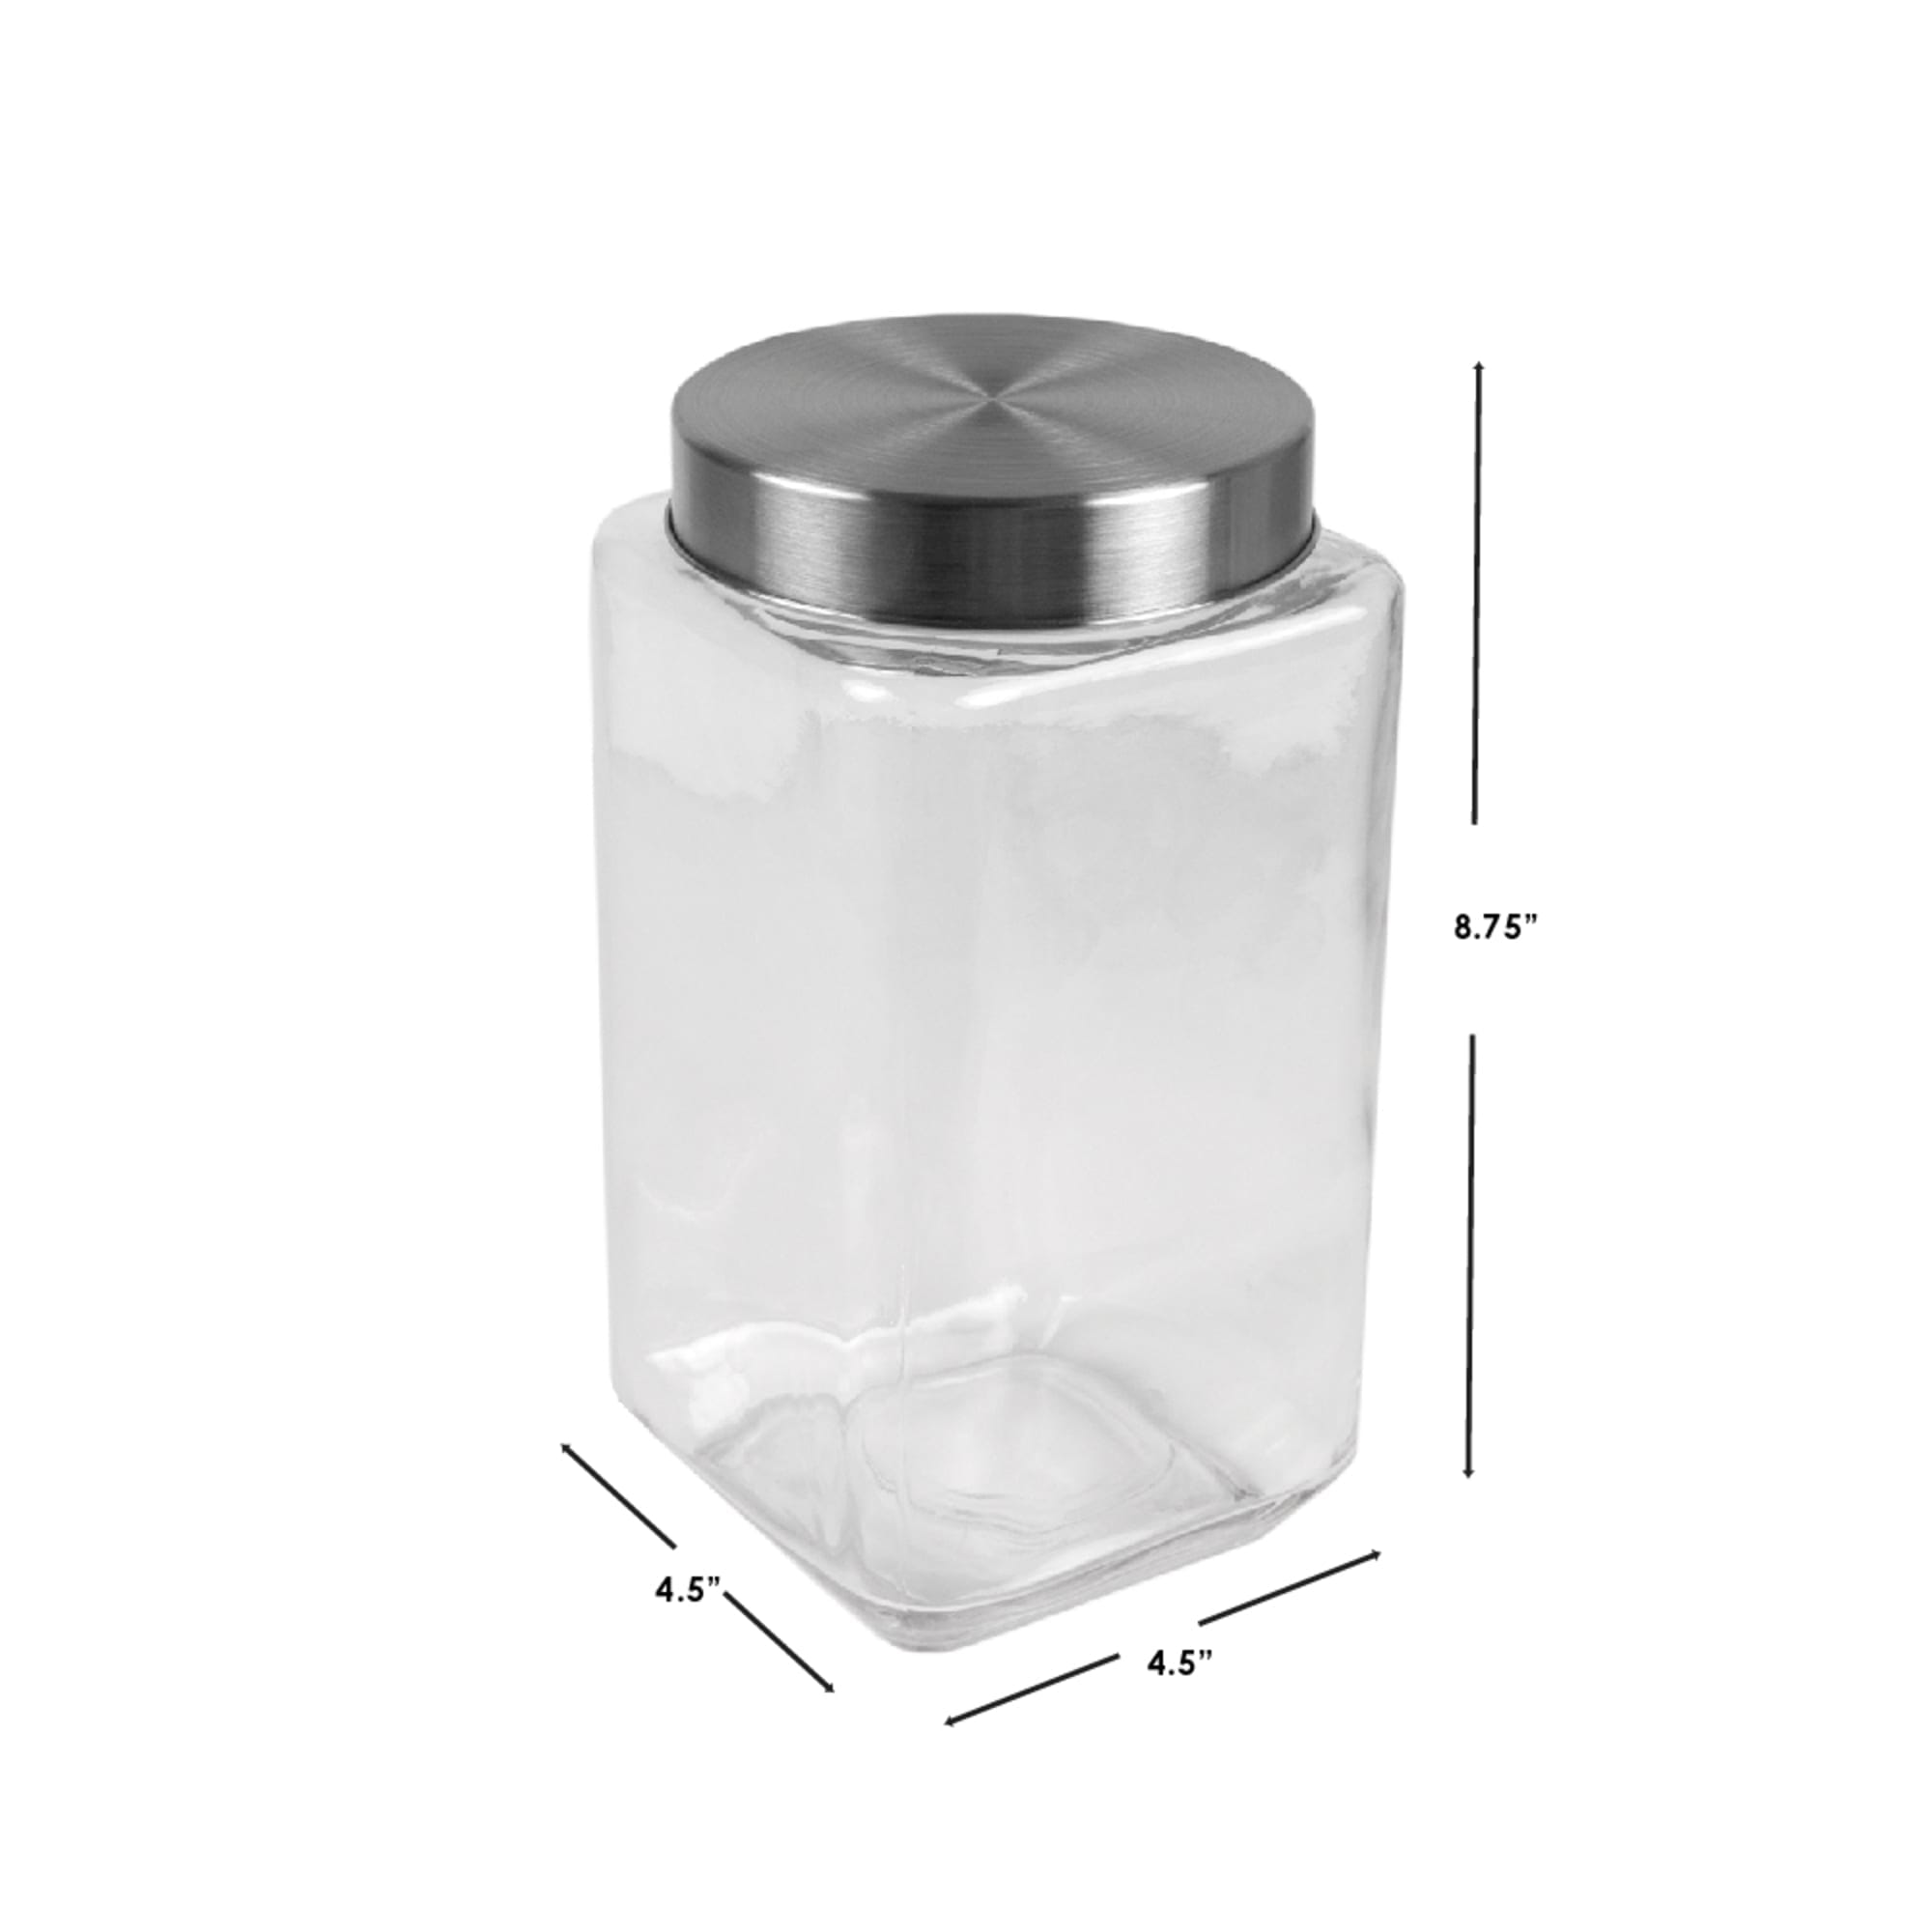 Home Basics 67 oz. Square Glass Canister with Brushed Stainless Steel Screw-on Lid Clear $4.00 EACH, CASE PACK OF 12